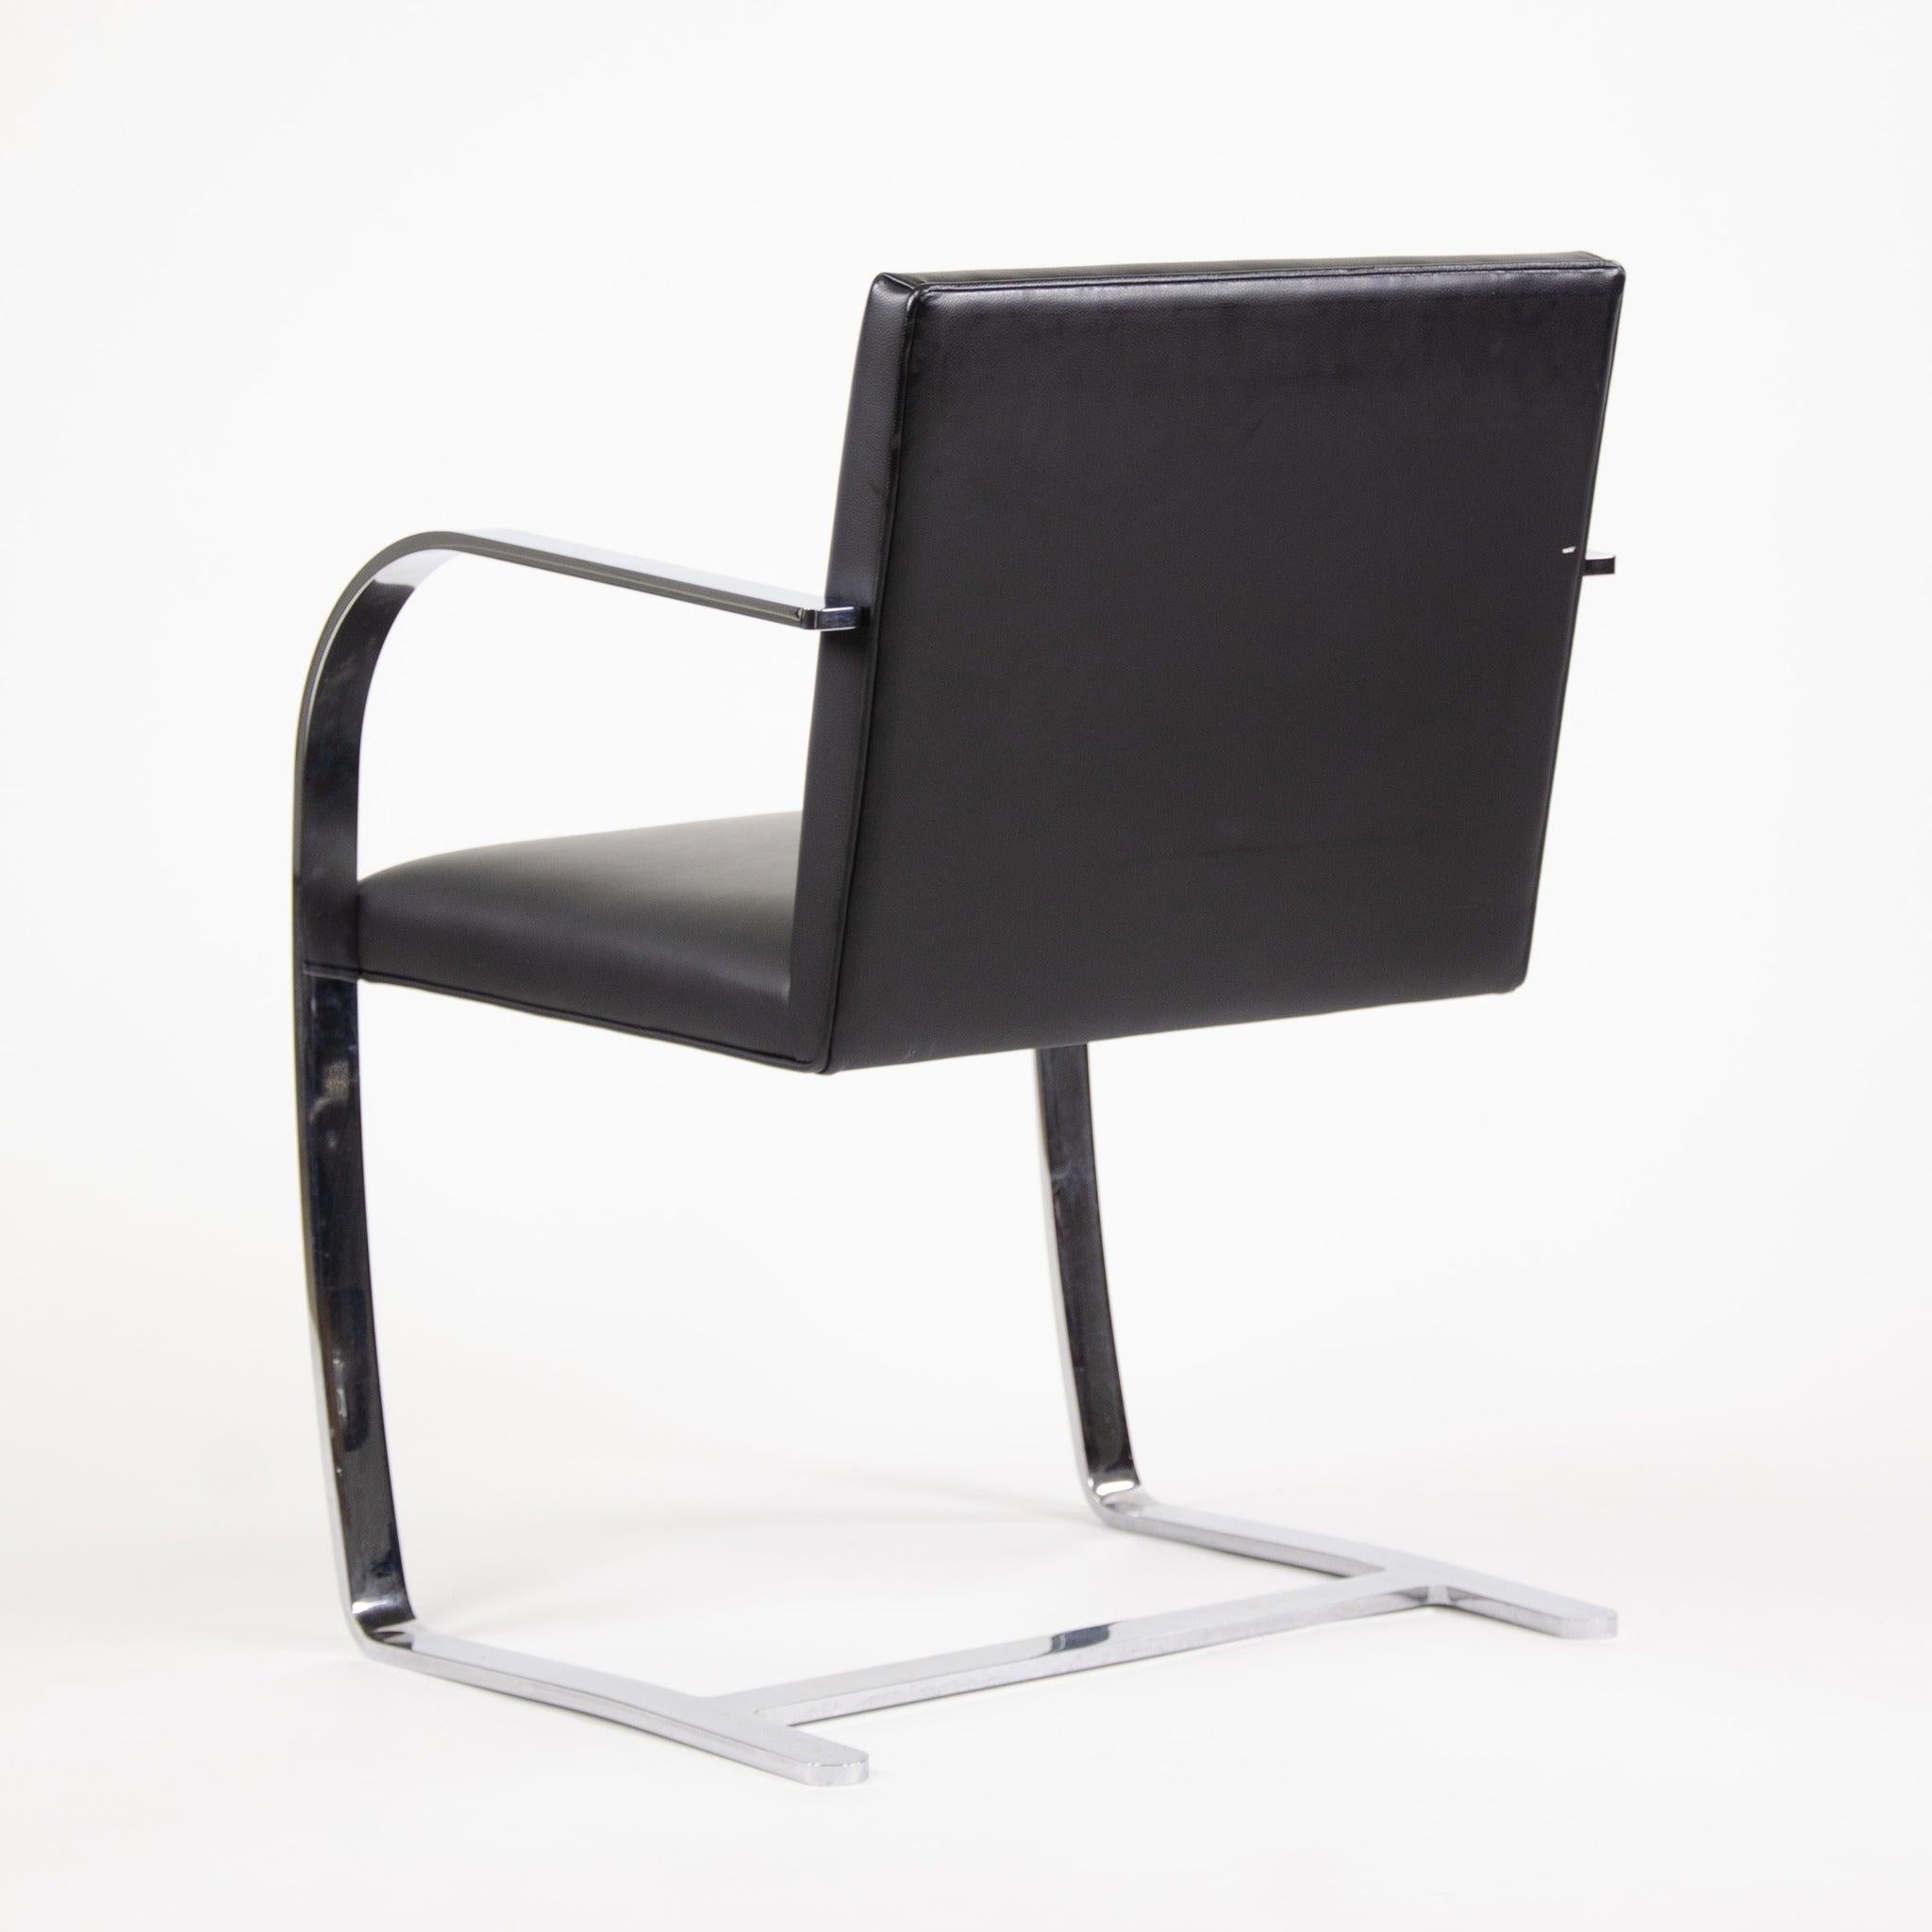 20th Century Mies van der Rohe for Knoll Brno Flat Bar Armchair 255 AC, Black Leather, Italy For Sale